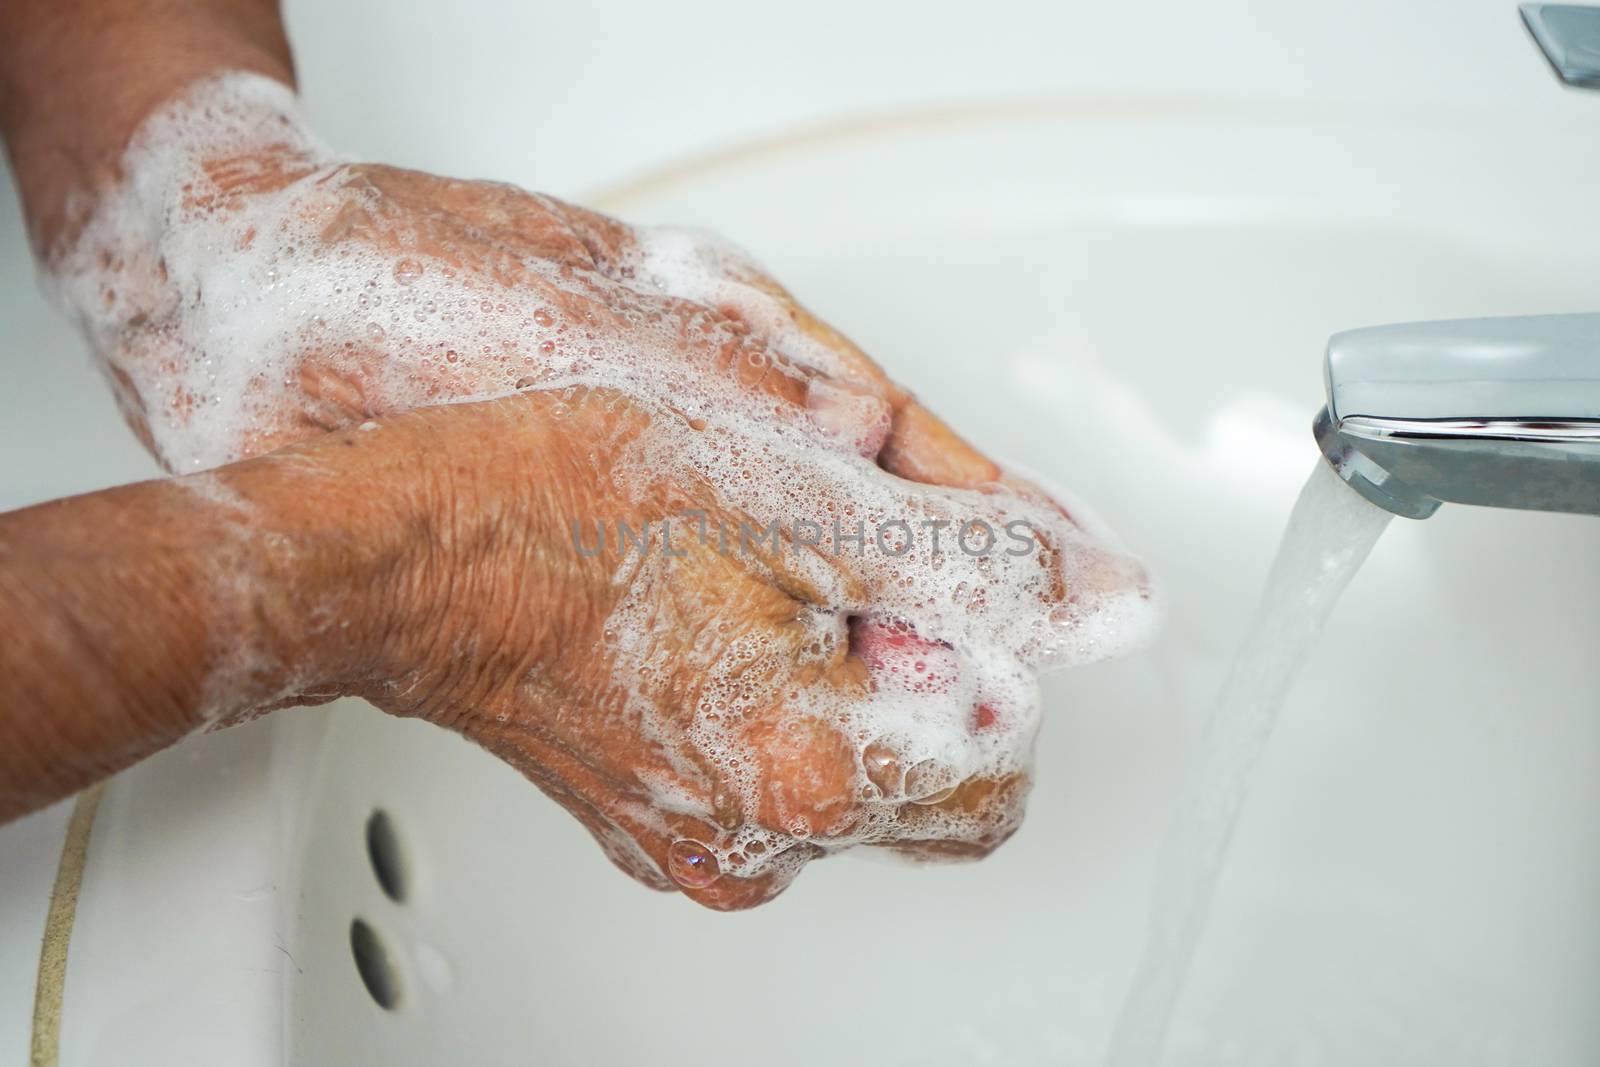 Pair of wrinkled hands washing in a sink